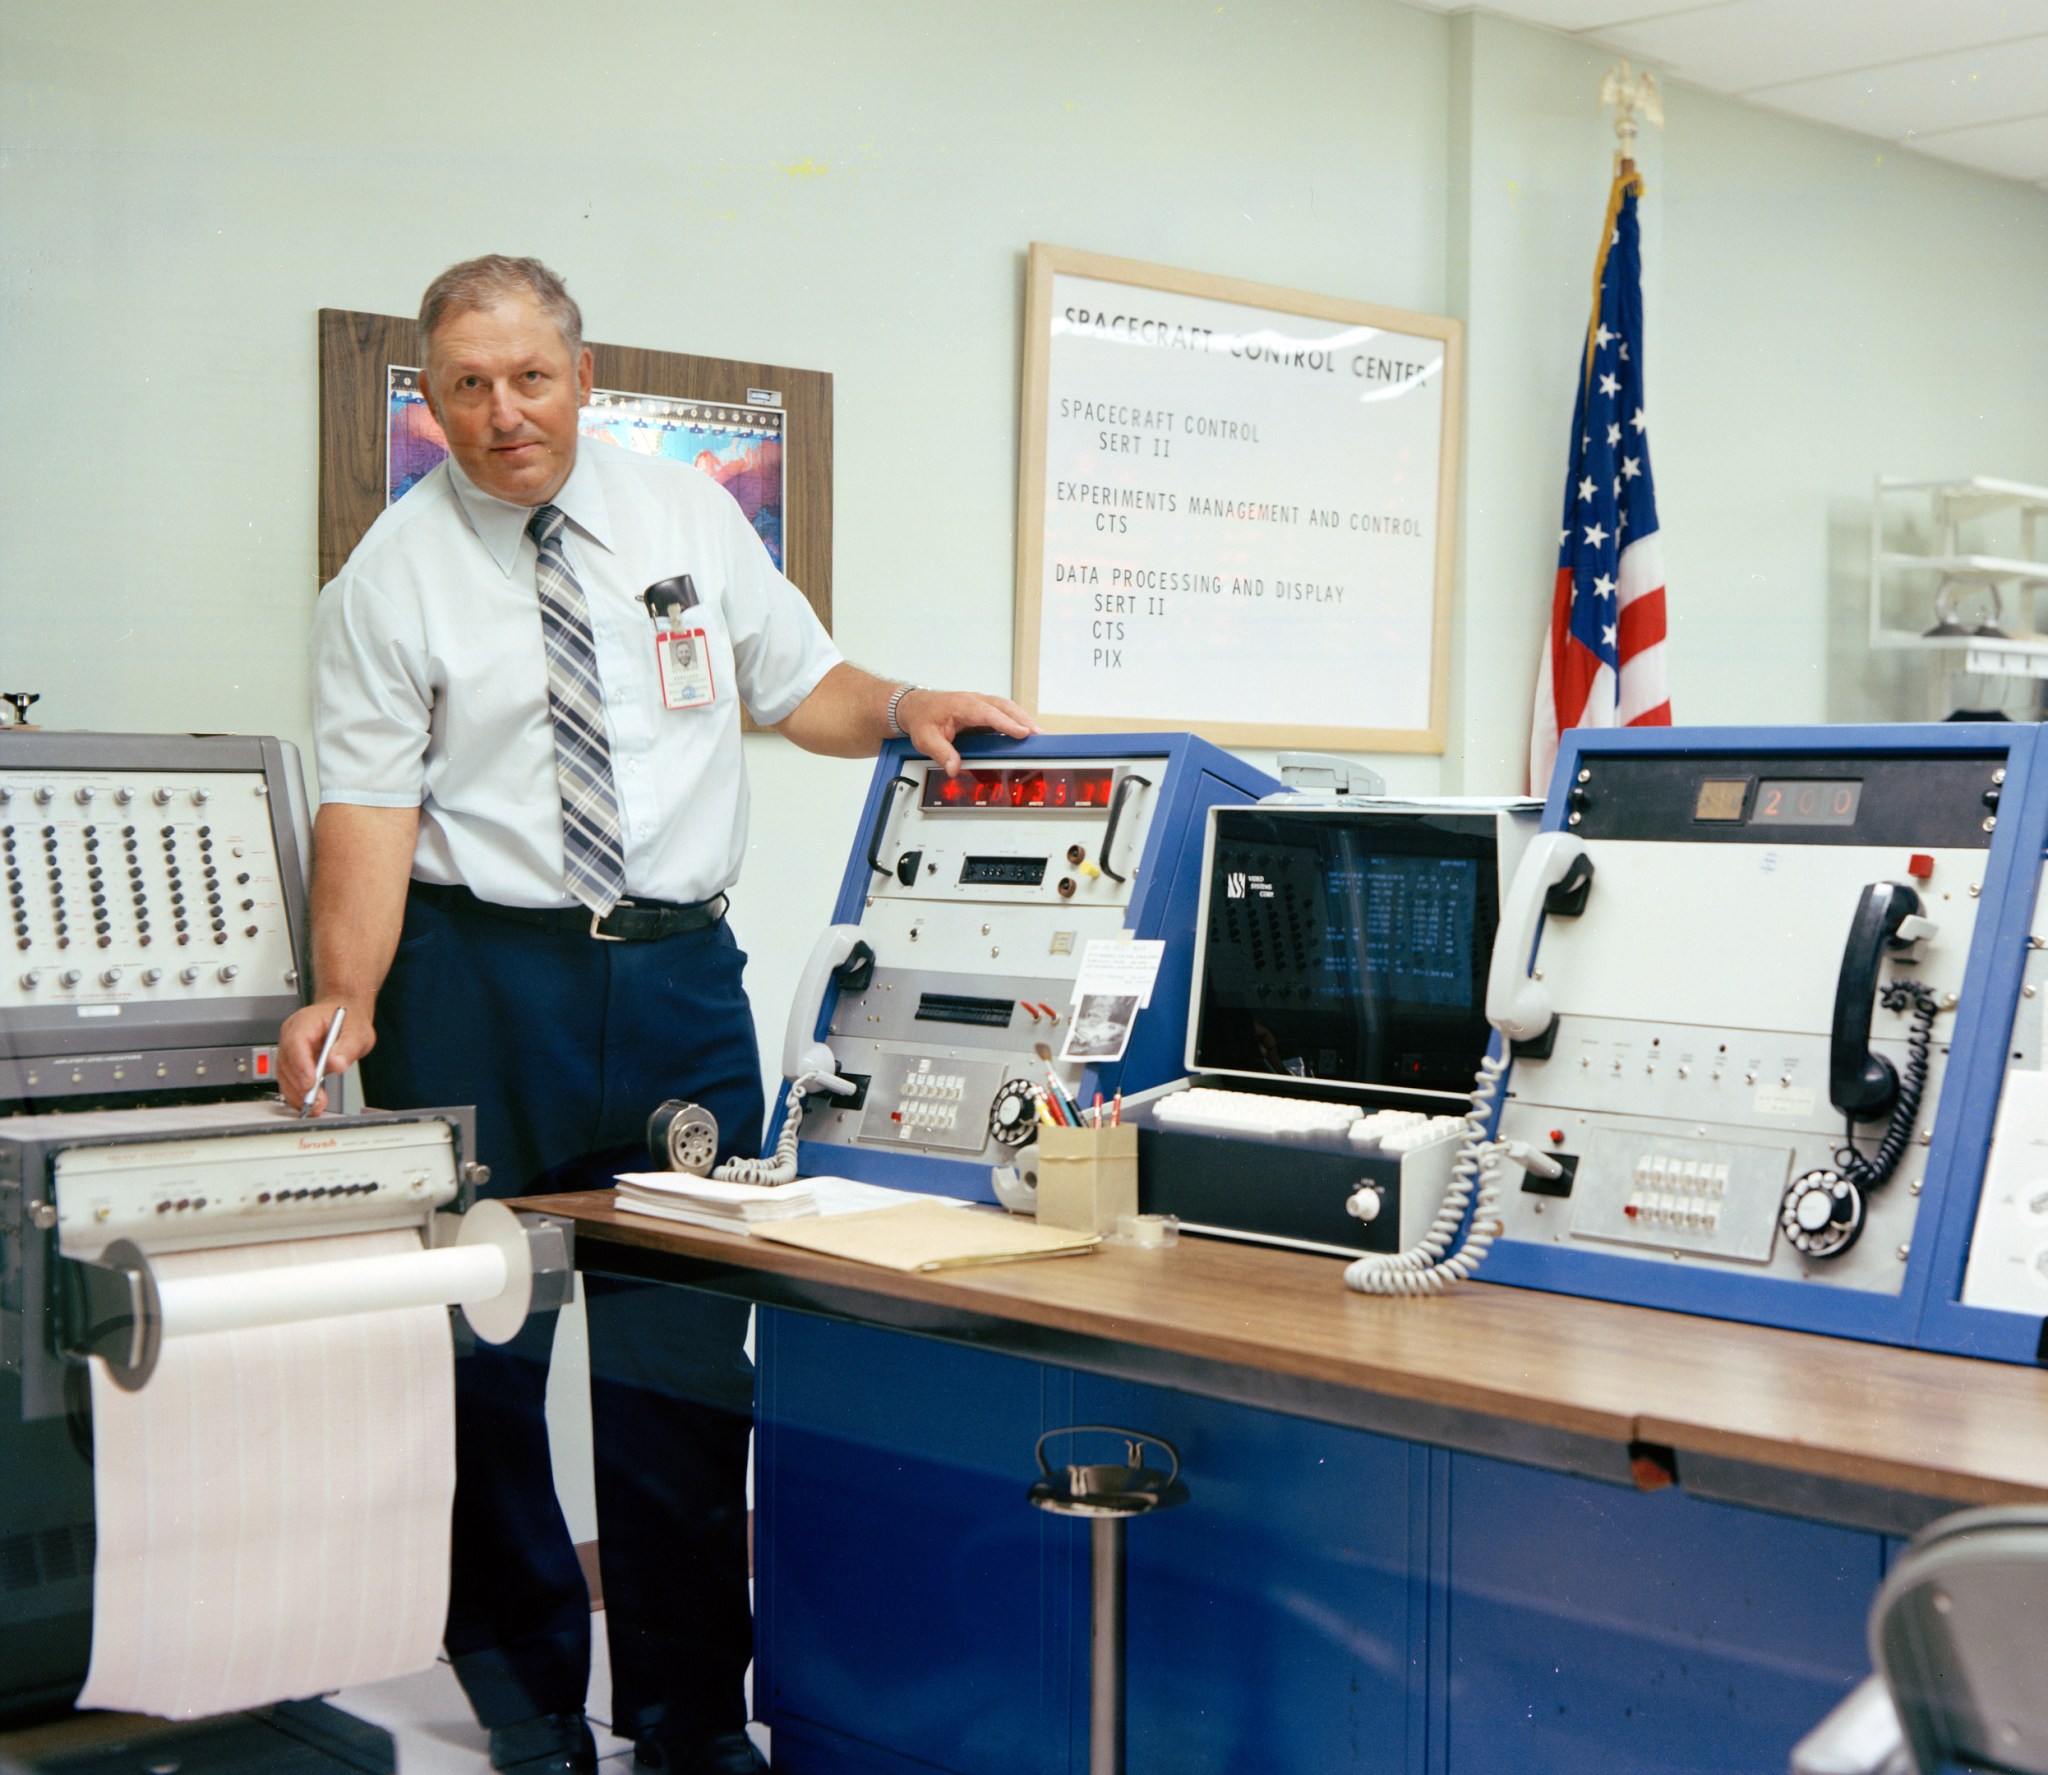 A man wearing a tie and a NASA employee badge stands in a control room next to various computers and consoles. He looks at the camera, and behind him is an American flag and a sign that says, 